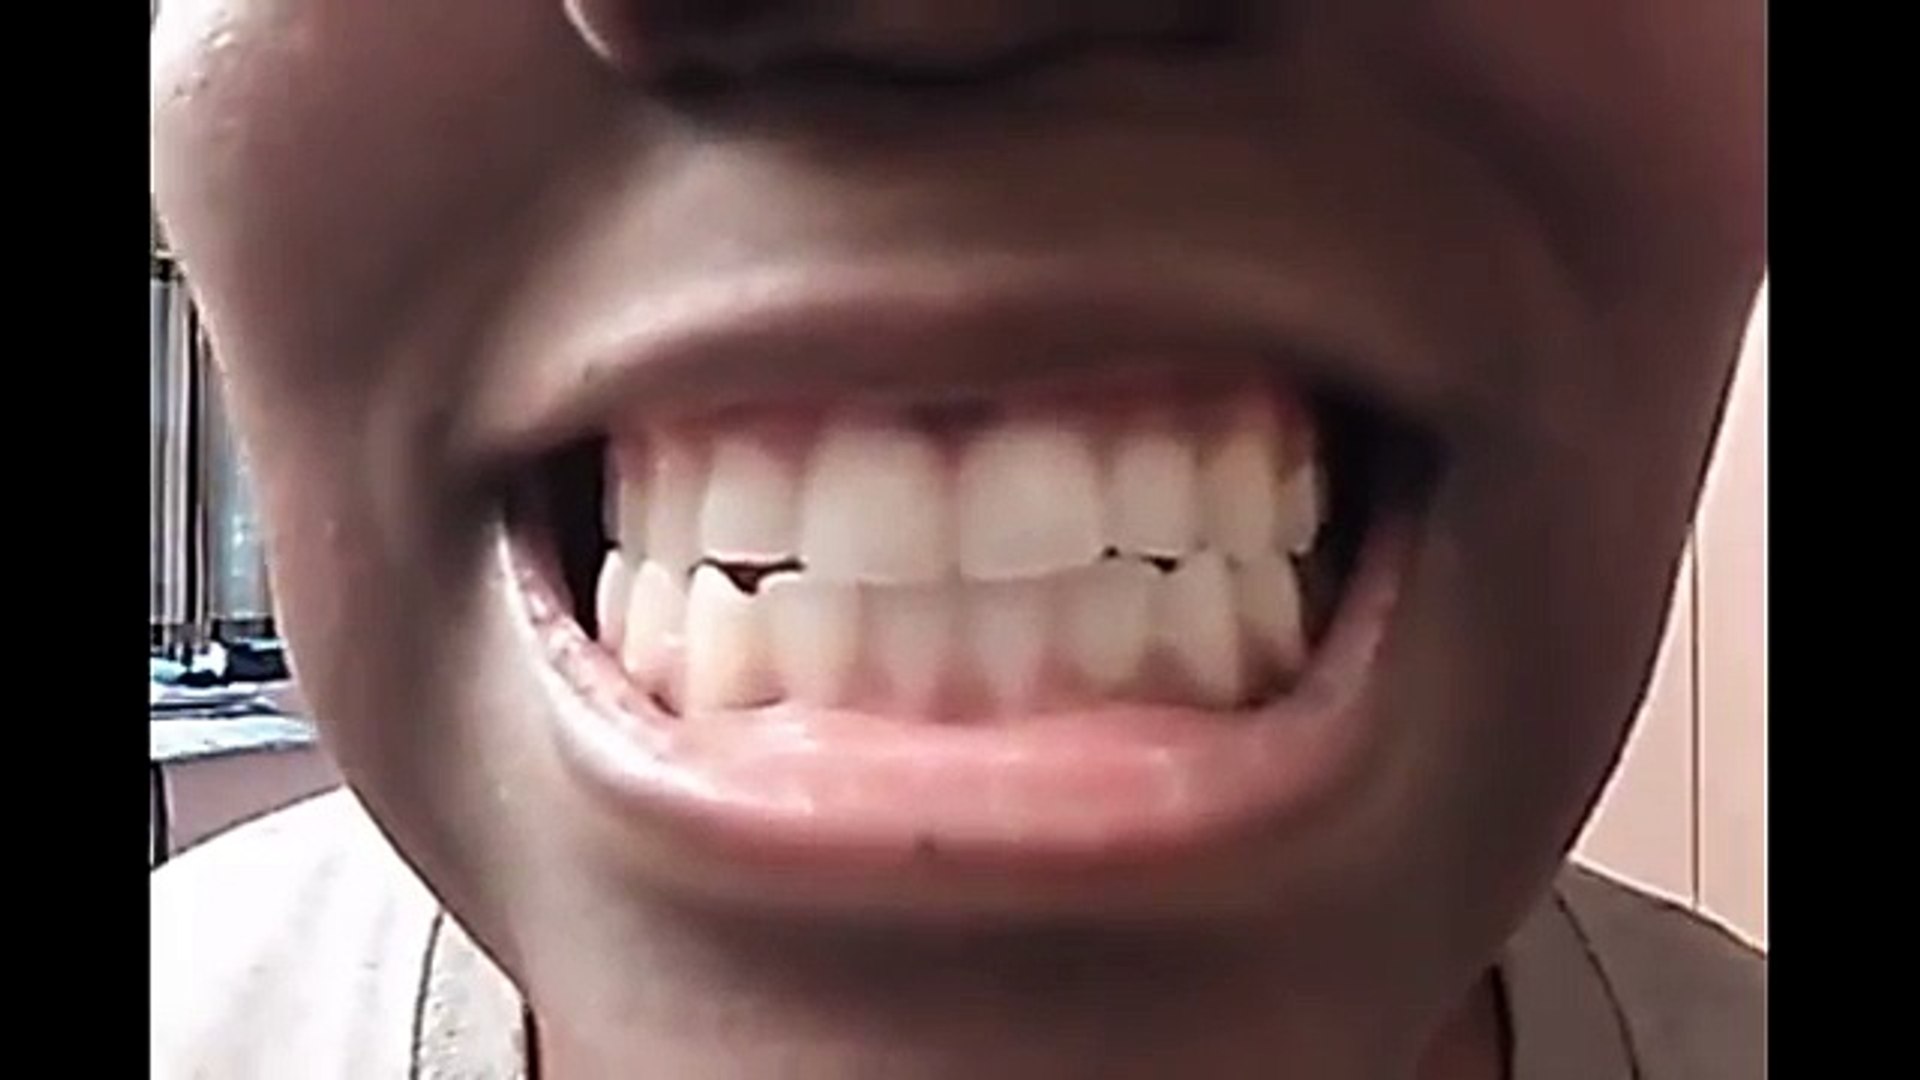 WARNING] Teeth Whitening Baking Soda and Lemon - Bad Reaction - Before &  After - The Mouth Episode - video Dailymotion